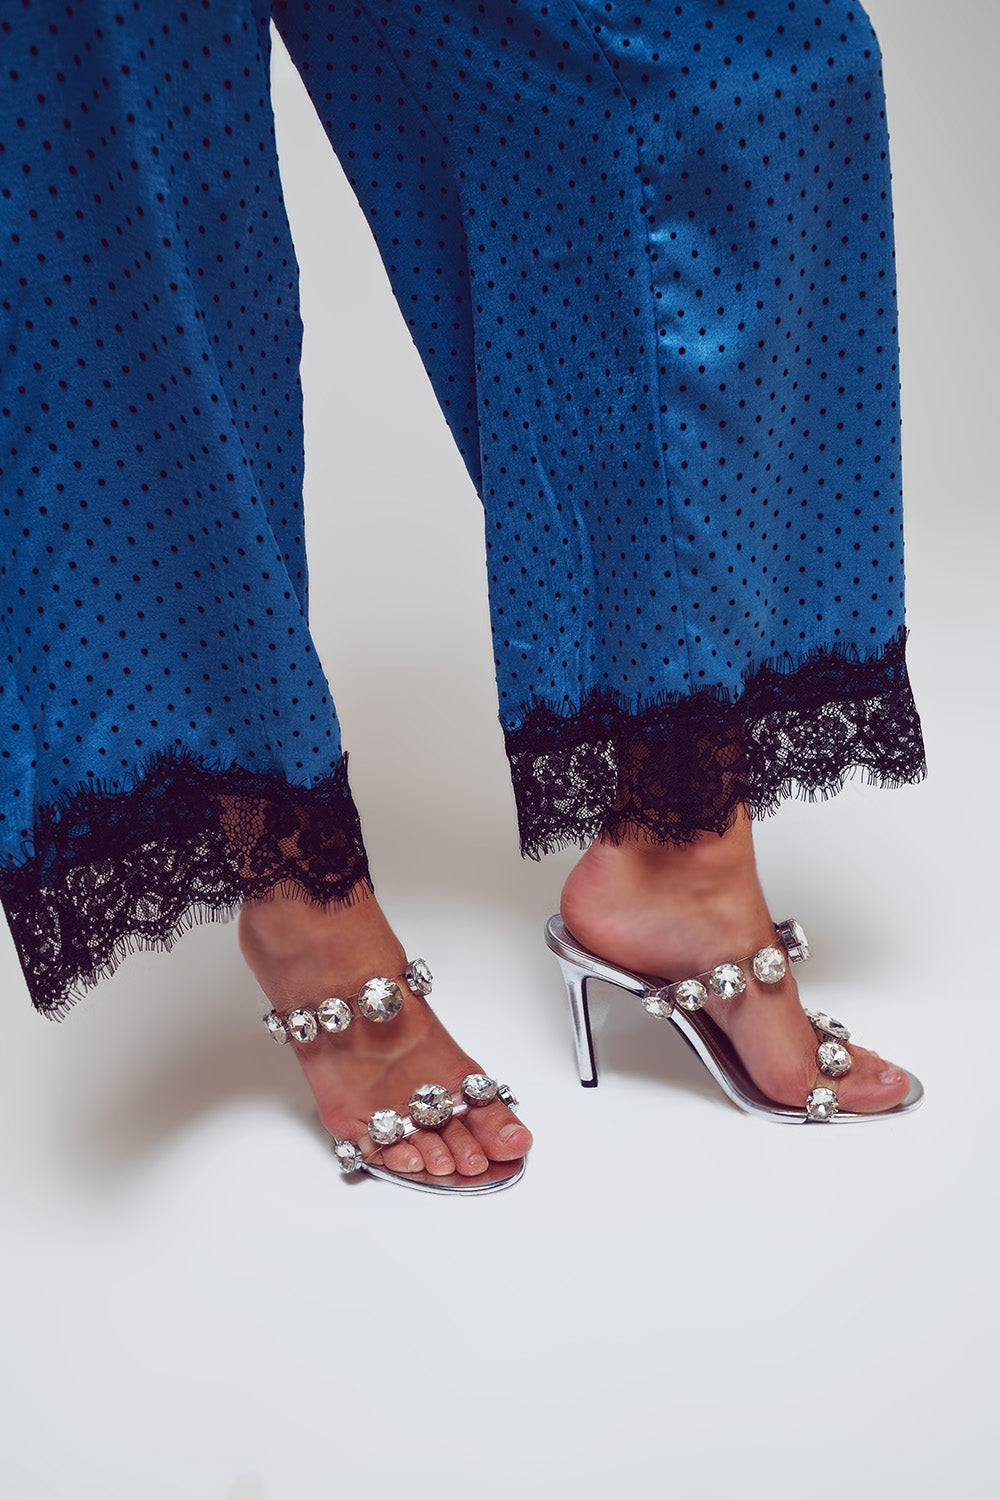 Wide Dotted Pants with Lace at the Hems - Szua Store